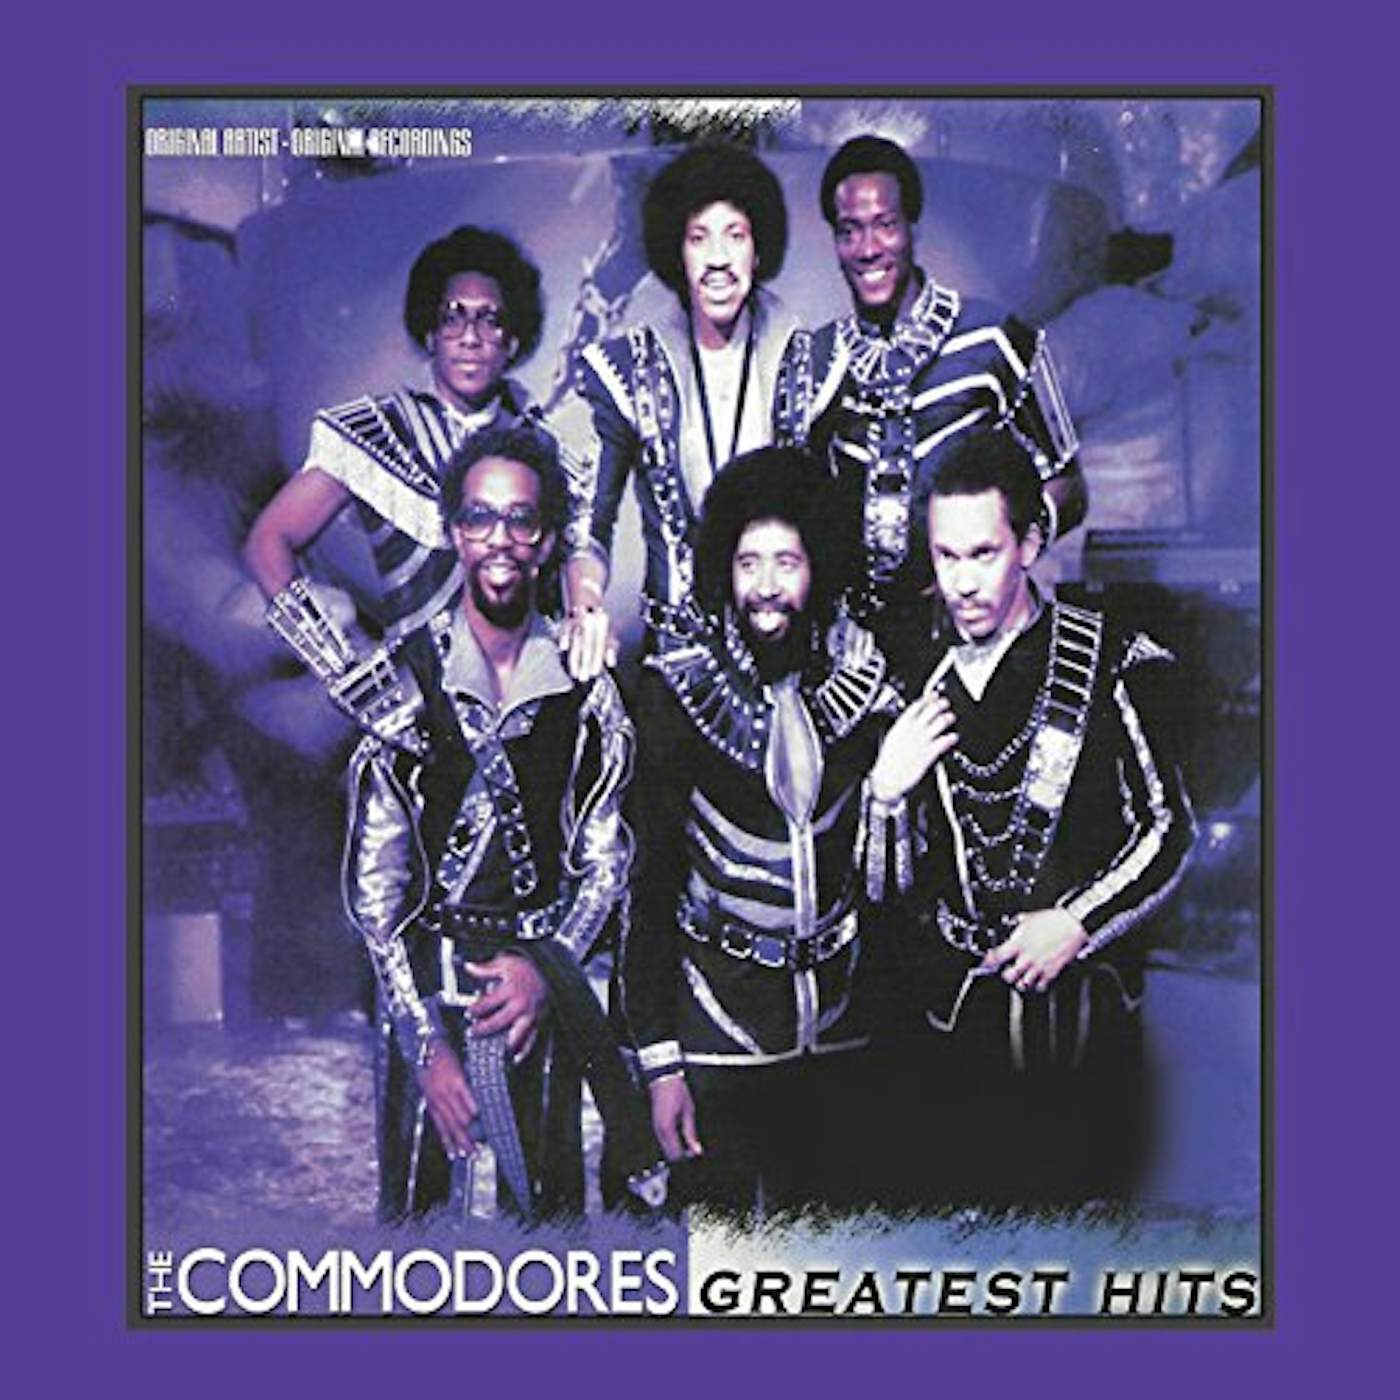 Commodores GREATEST HITS CD